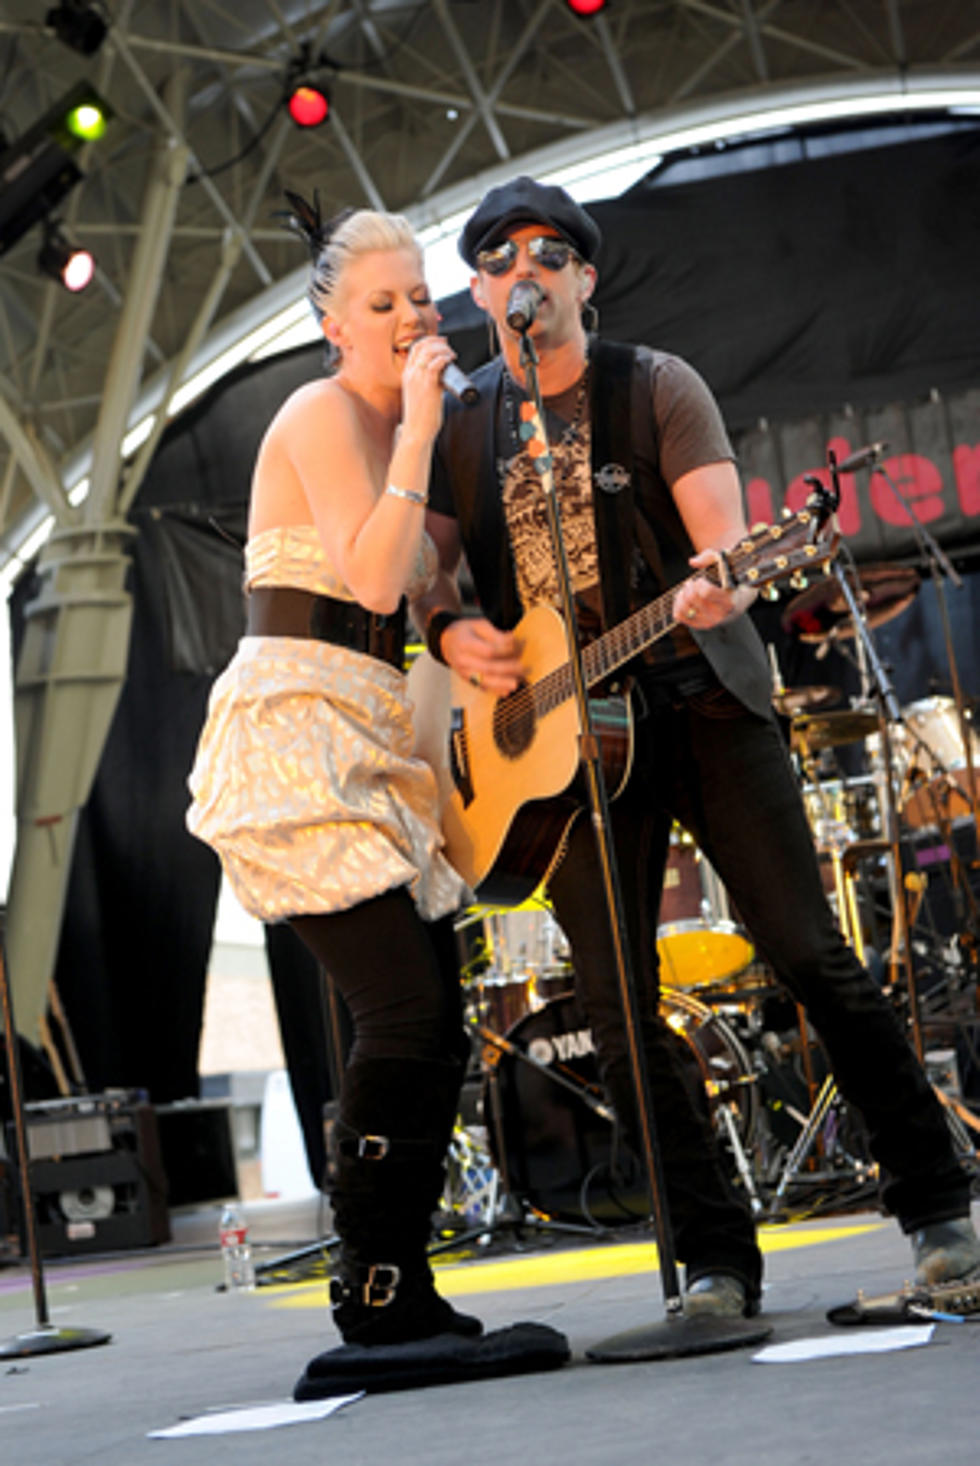 Thompson Square In Town Friday [VIDEO]